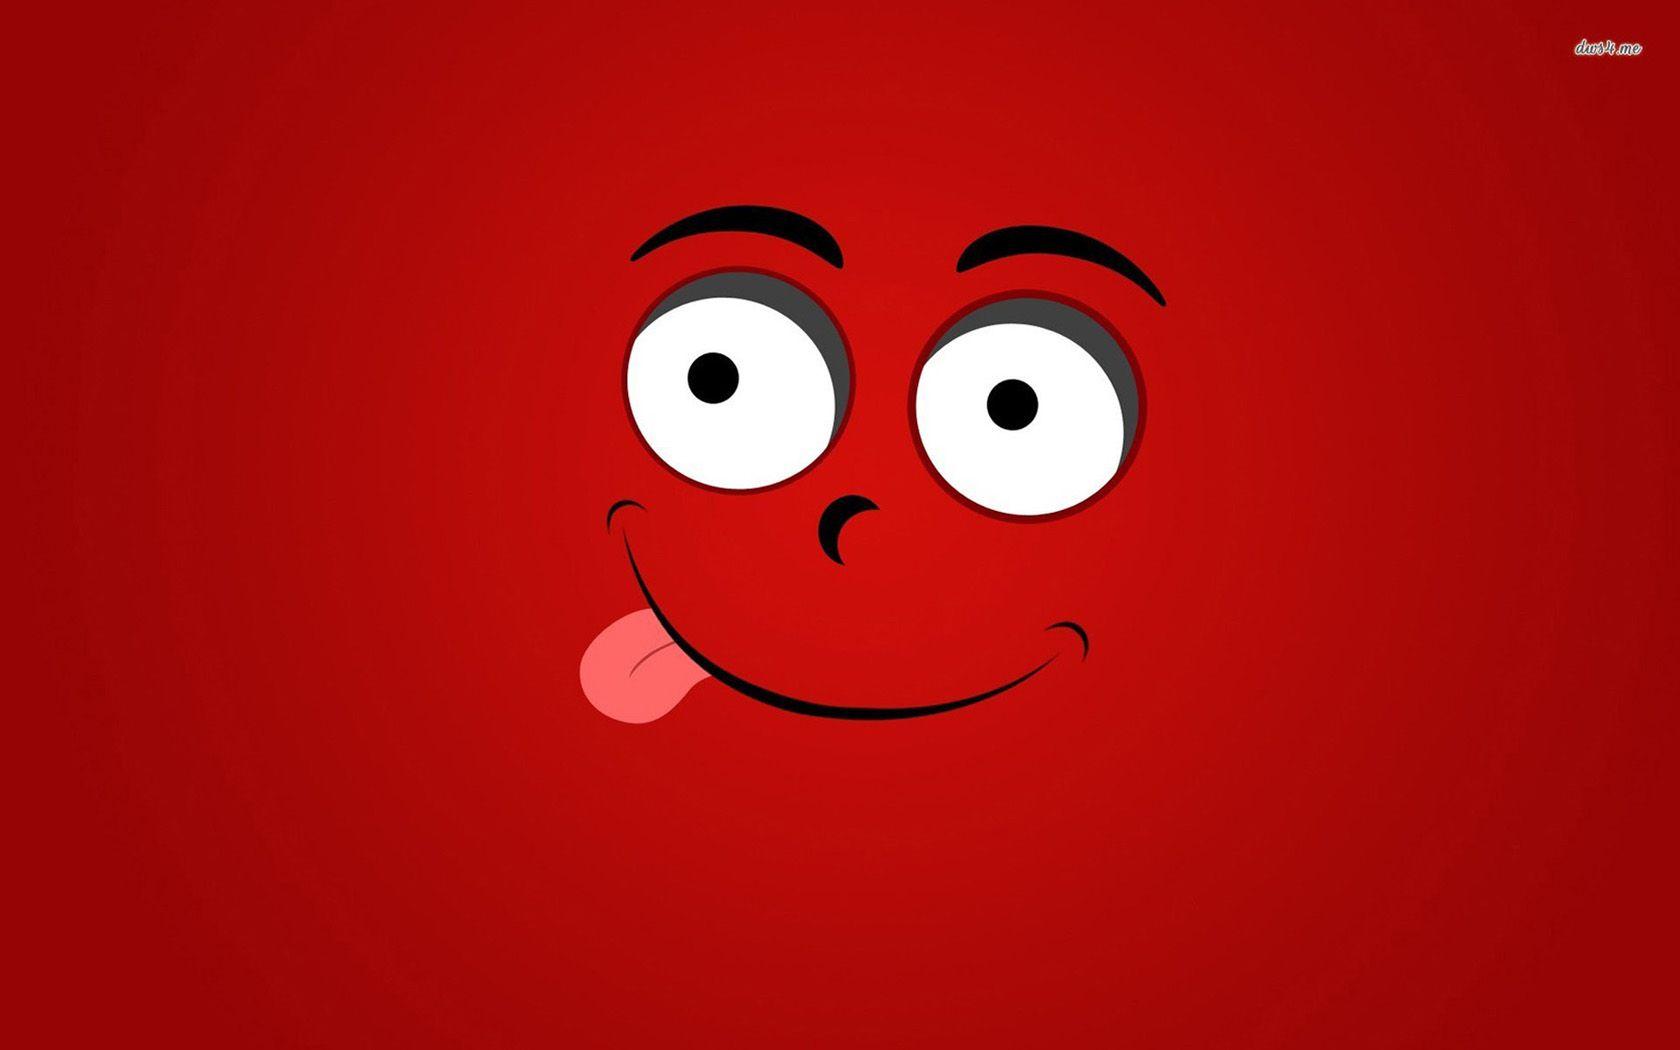 Funny Faces Wallpaper, 46 Funny Faces Image and Wallpaper for Mac